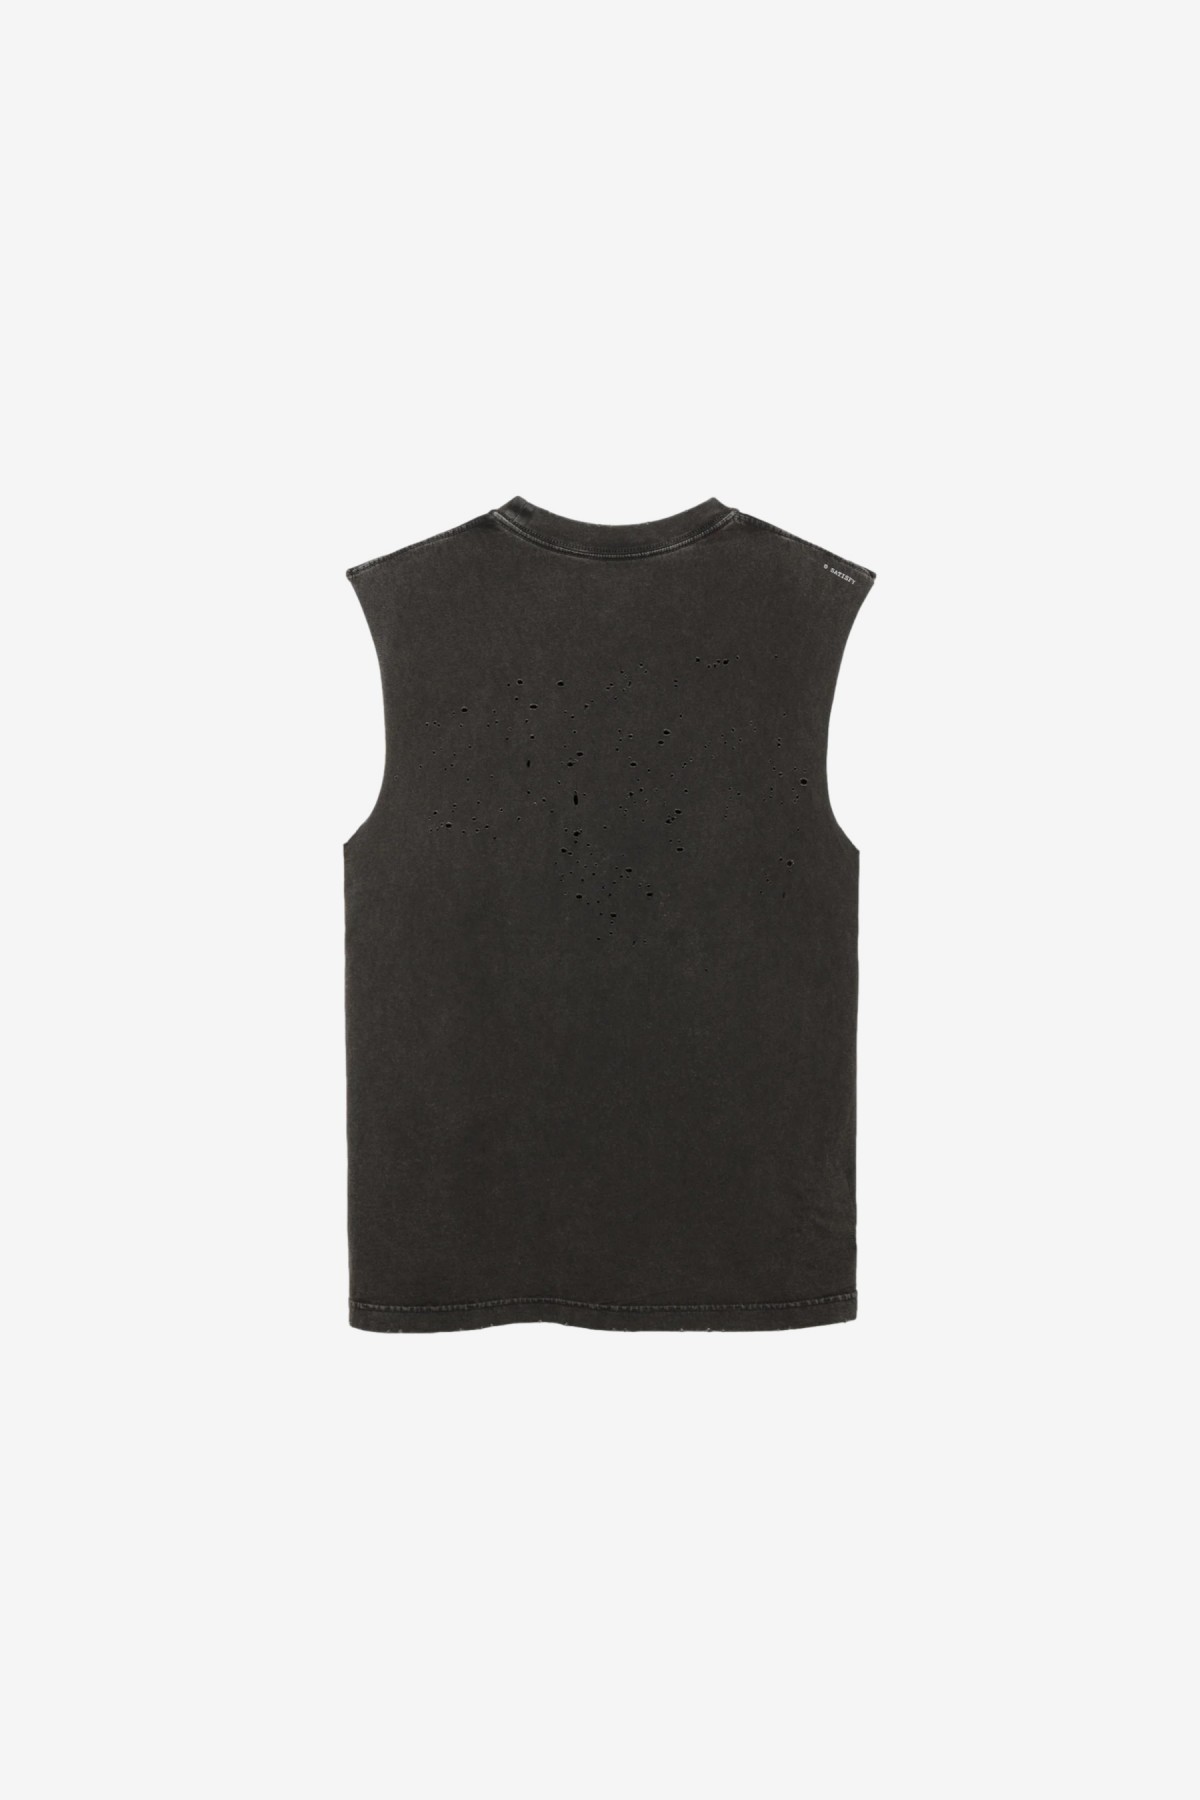 Satisfy Running MothTech Muscle Tee in Aged Black